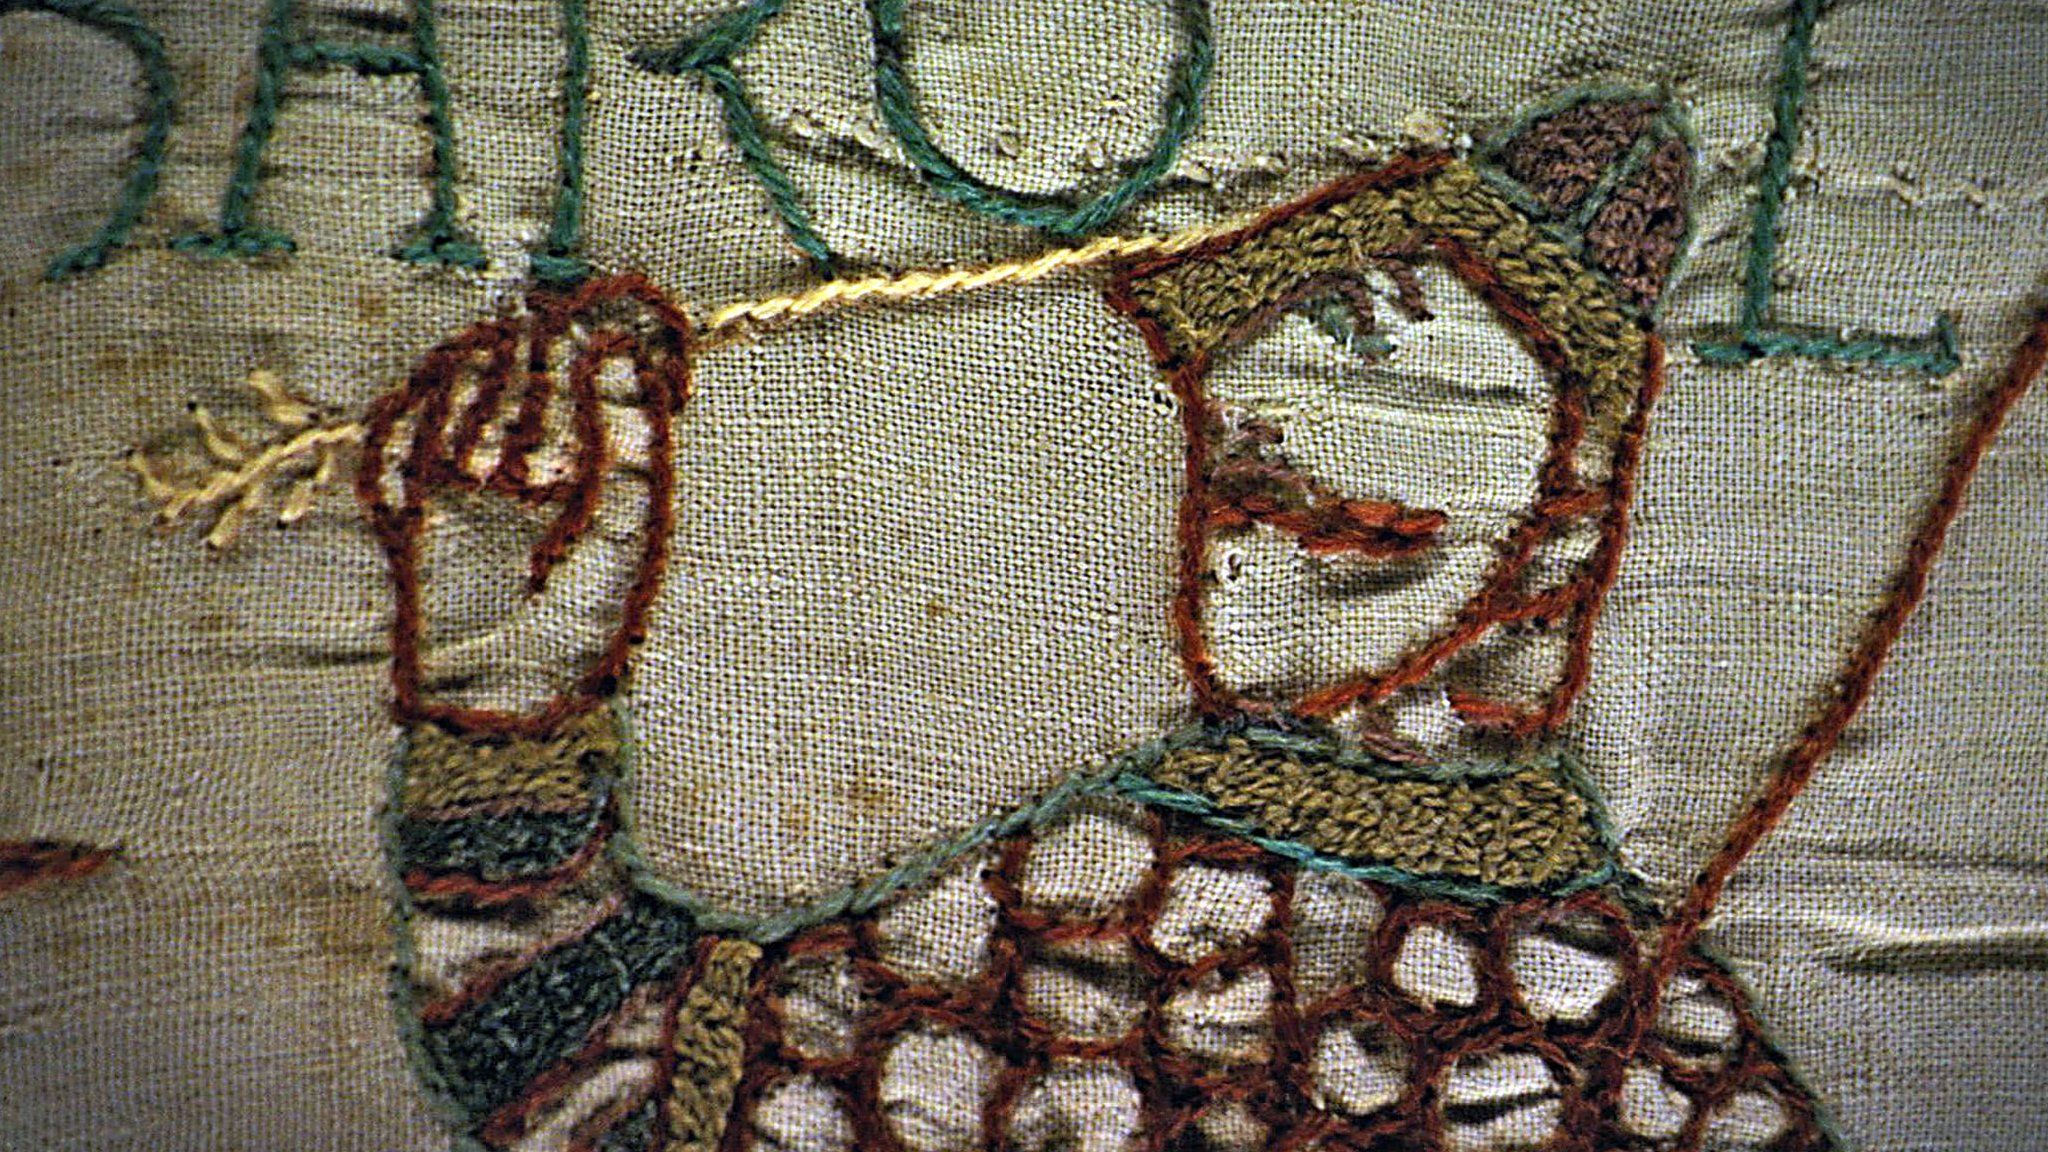 King Harold depicted on the Bayeux Tapestry